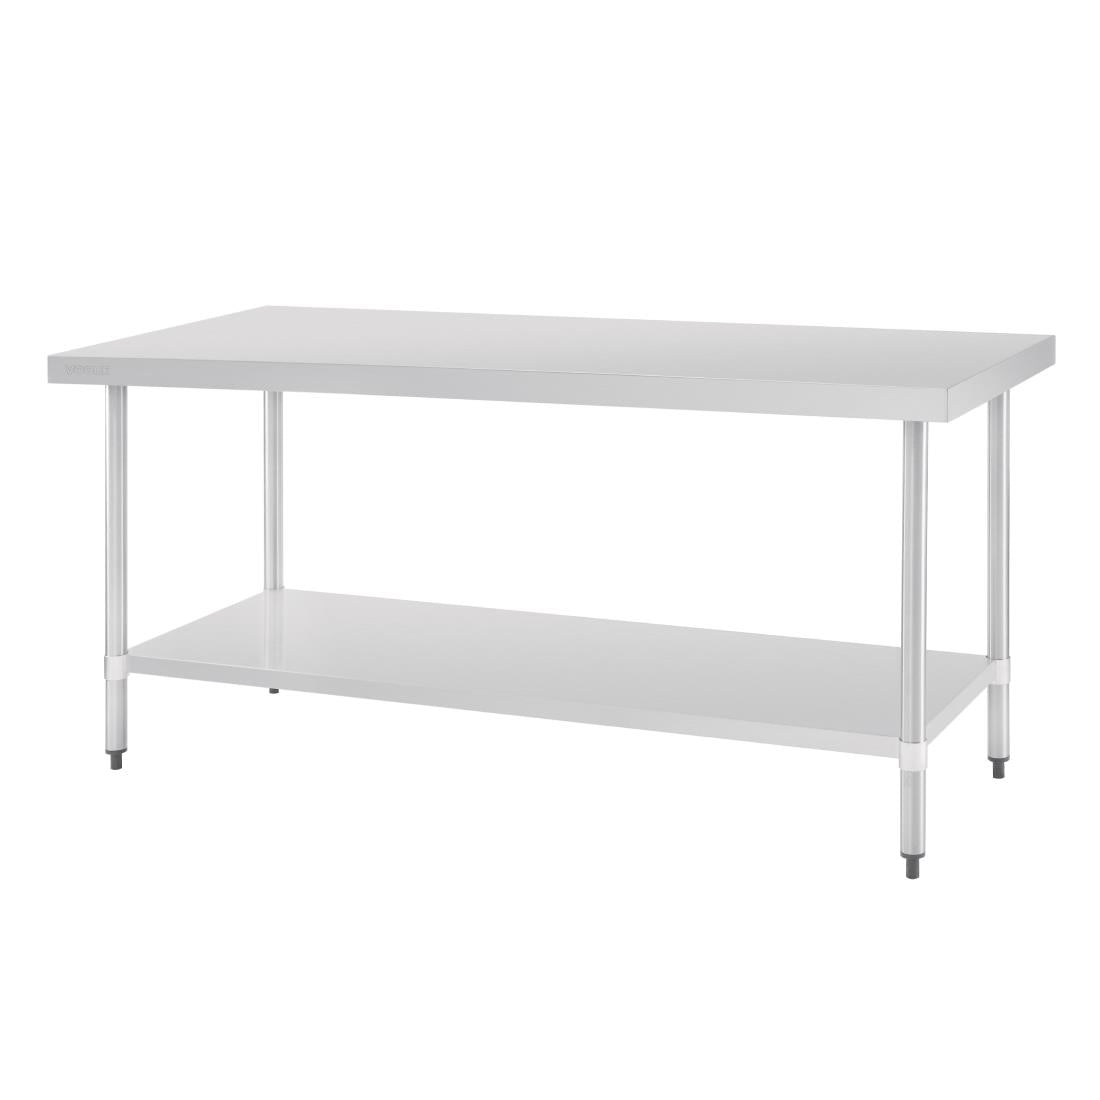 GJ504 Vogue Stainless Steel Prep Table 1800mm JD Catering Equipment Solutions Ltd